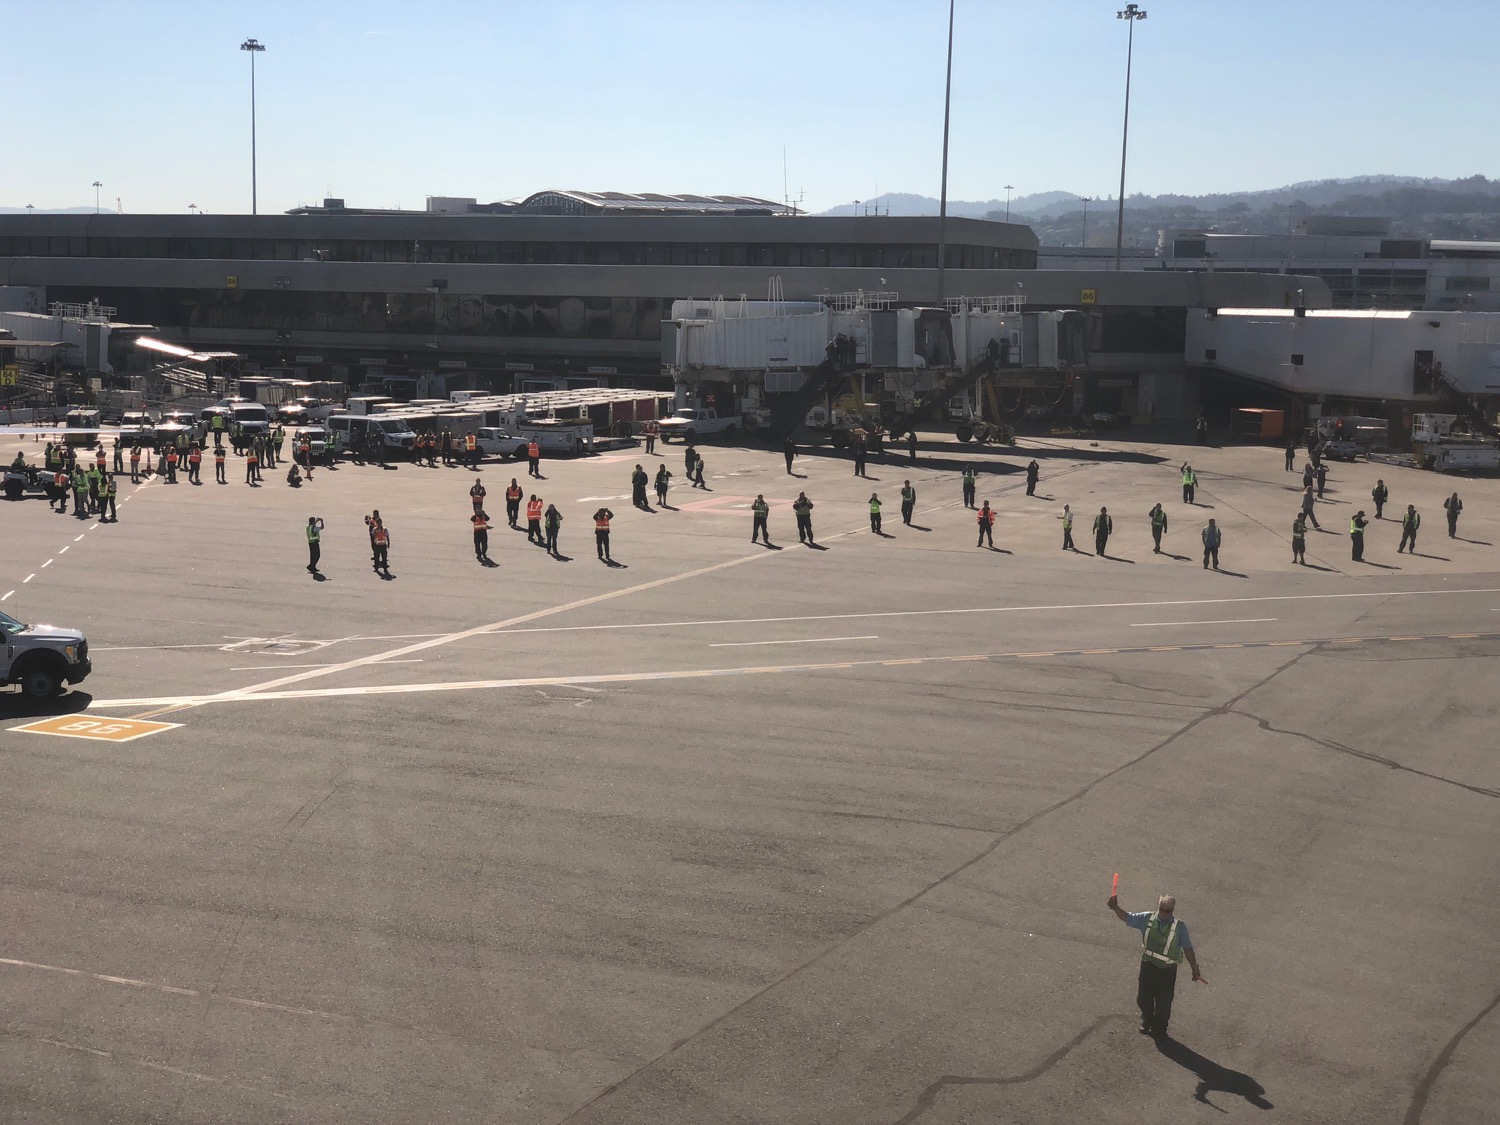 a group of people in orange vests walking on a tarmac